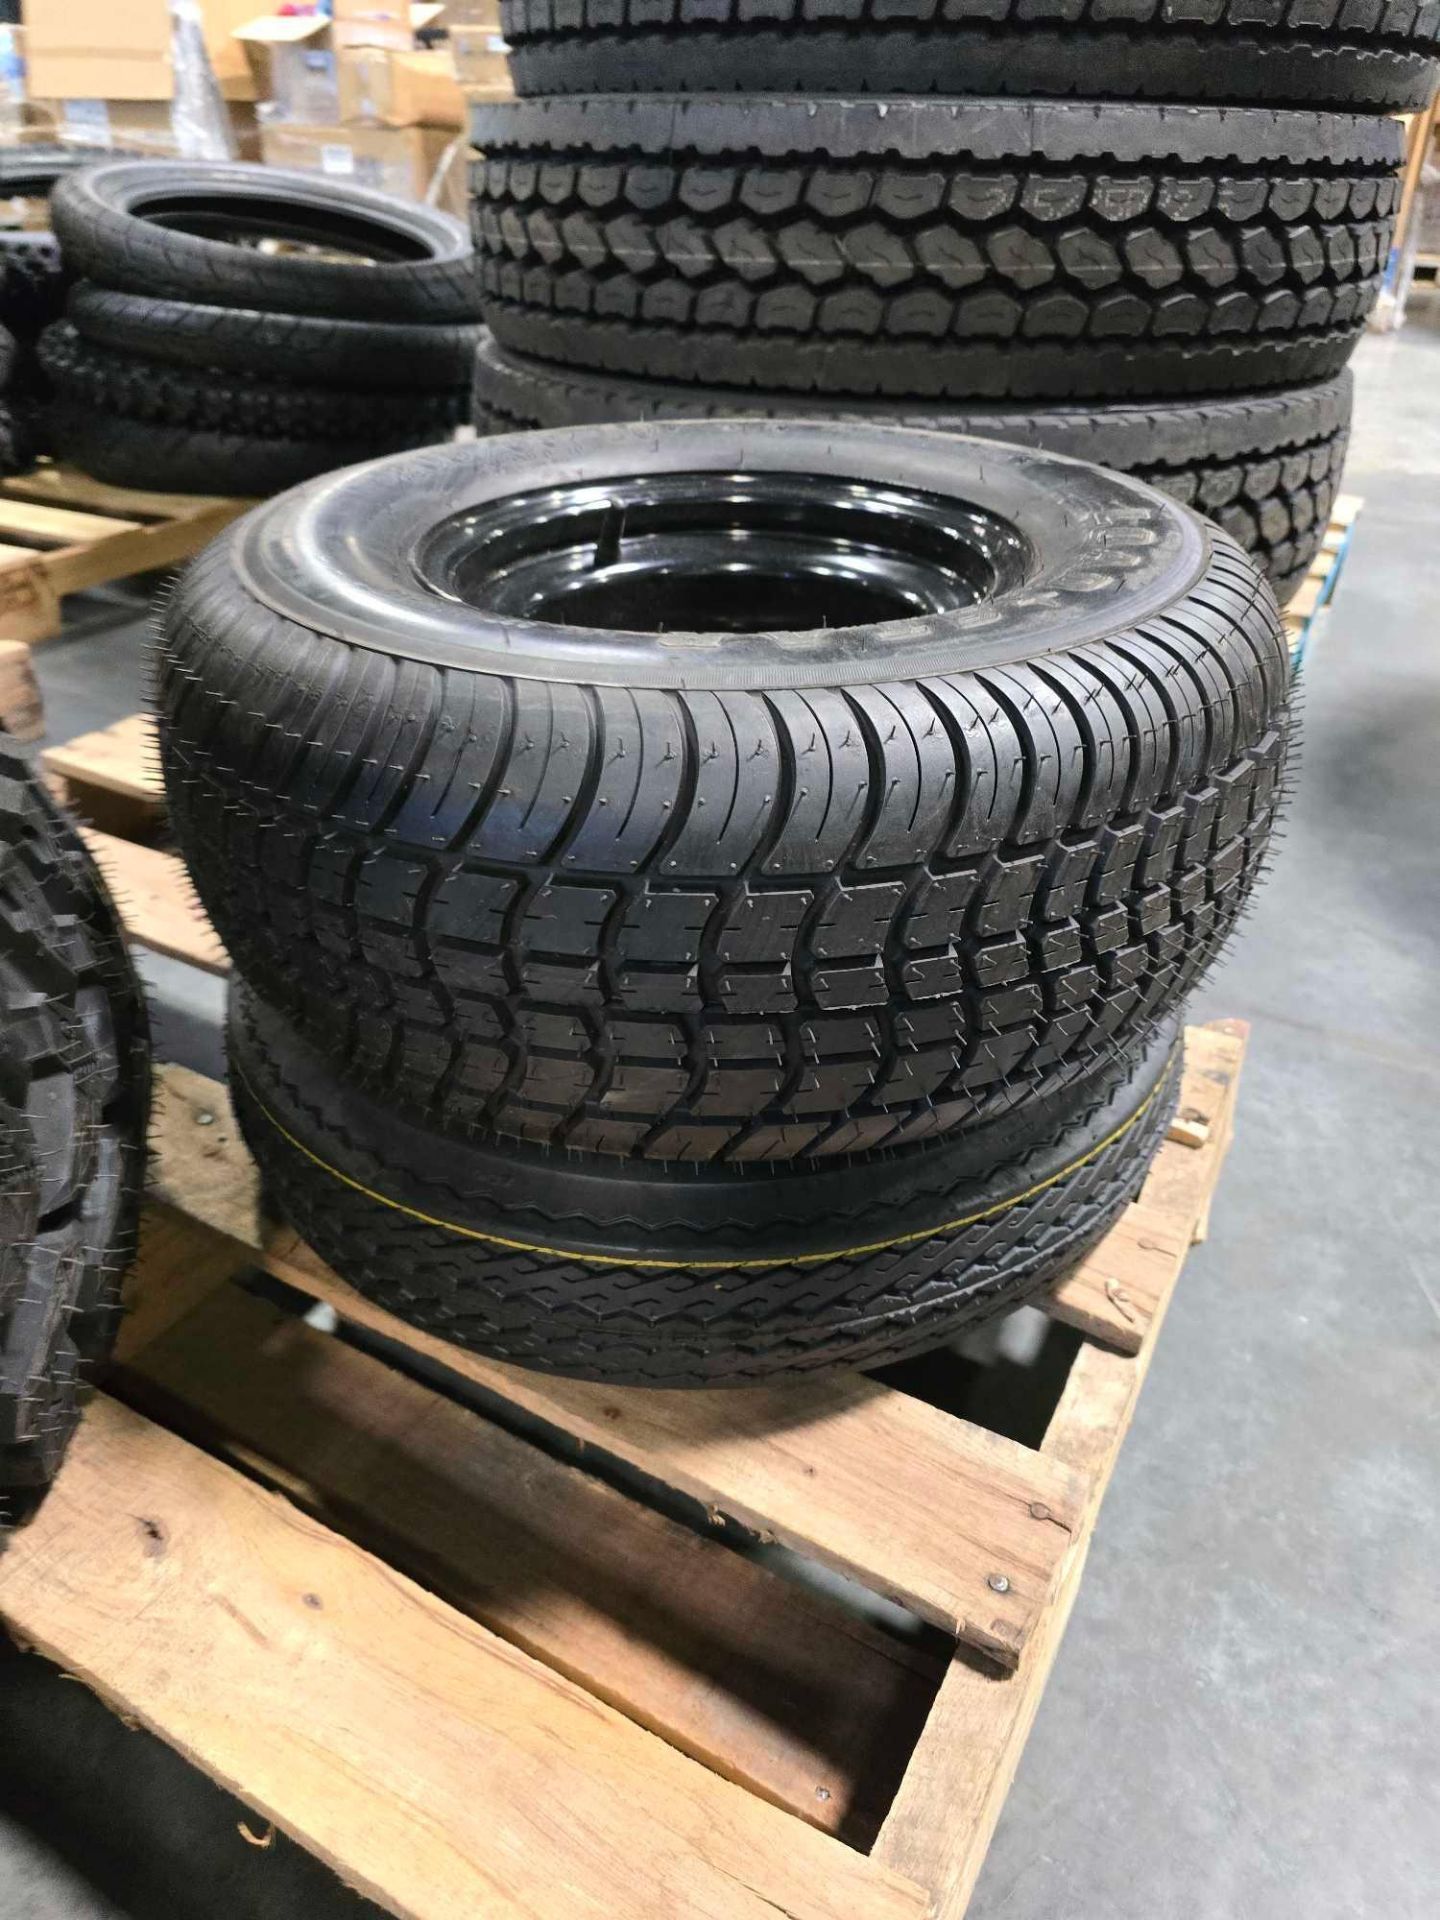 pallet of tires with rims - Image 5 of 11